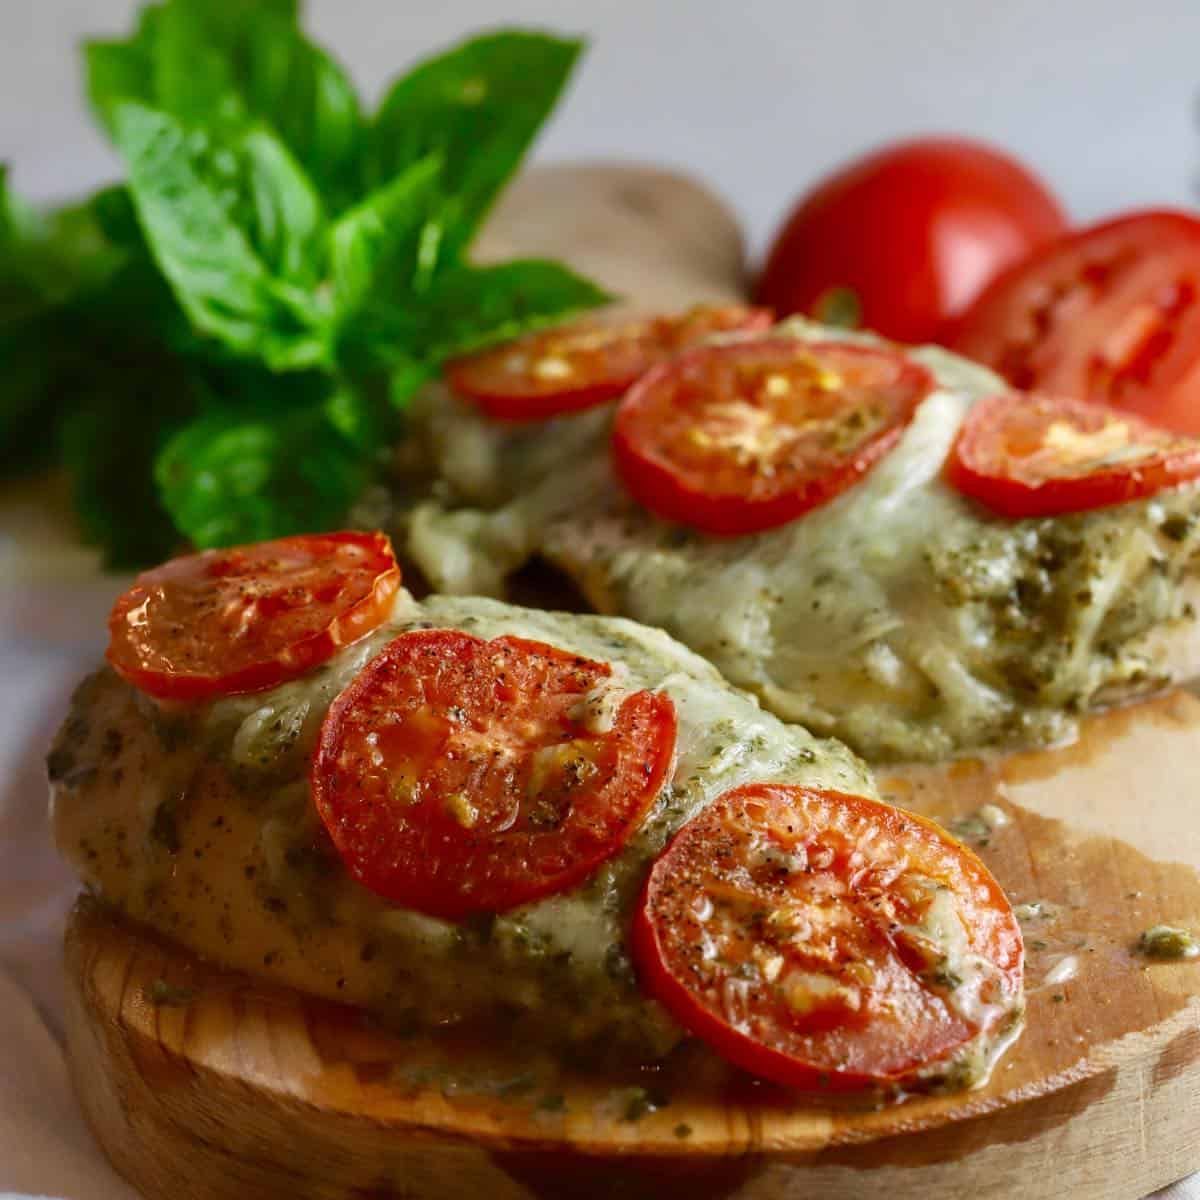 Two baked pesto chicken breasts topped with tomato slices.